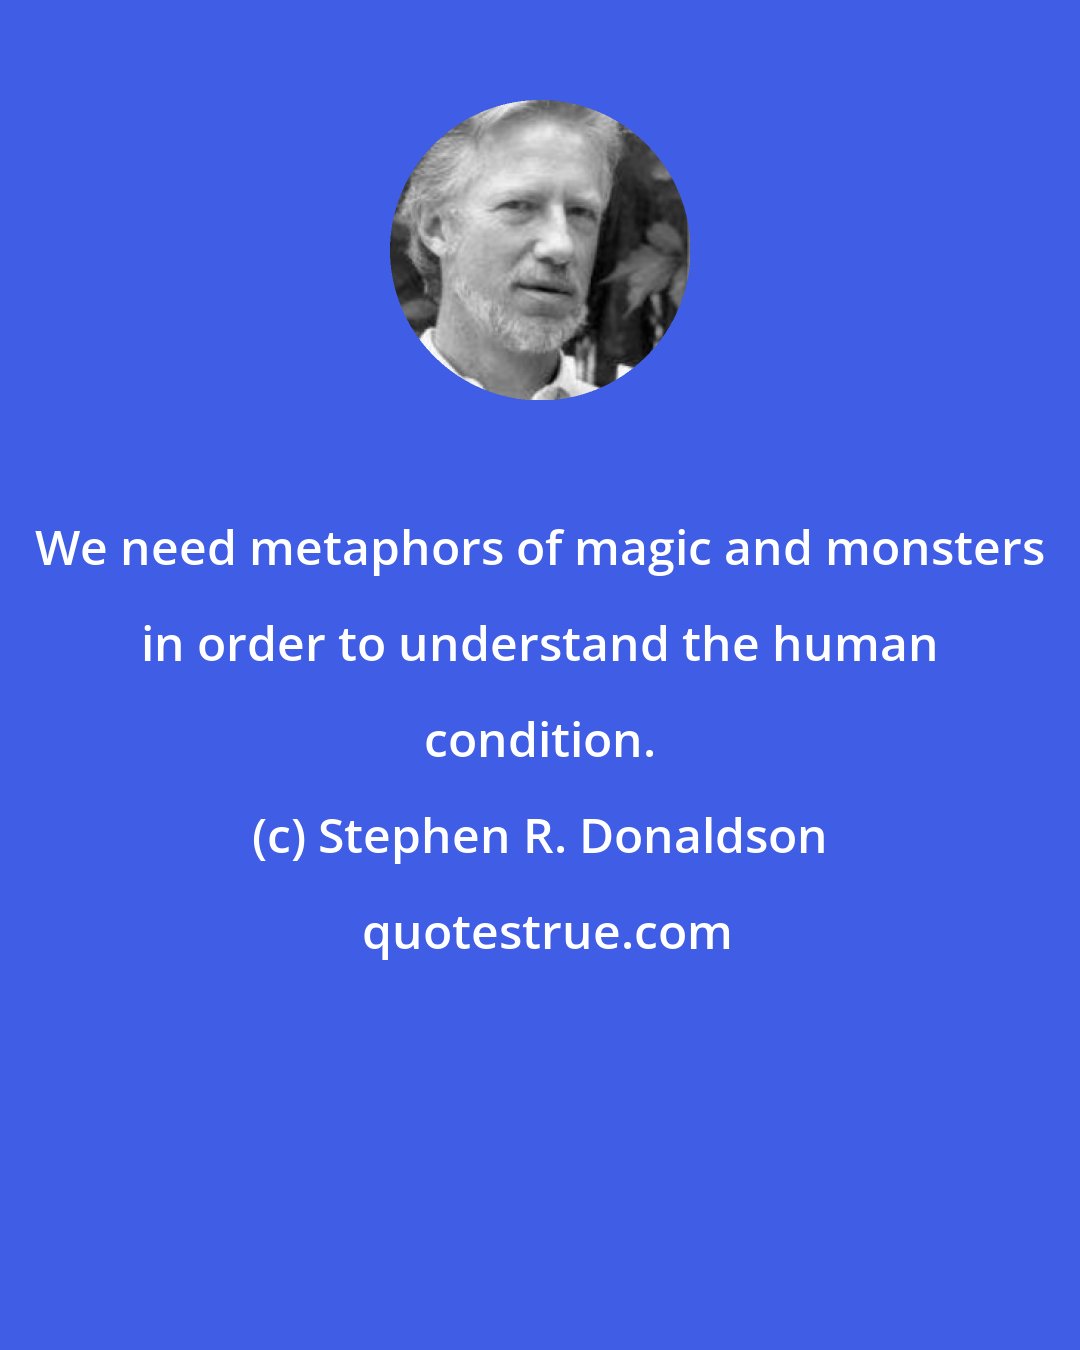 Stephen R. Donaldson: We need metaphors of magic and monsters in order to understand the human condition.